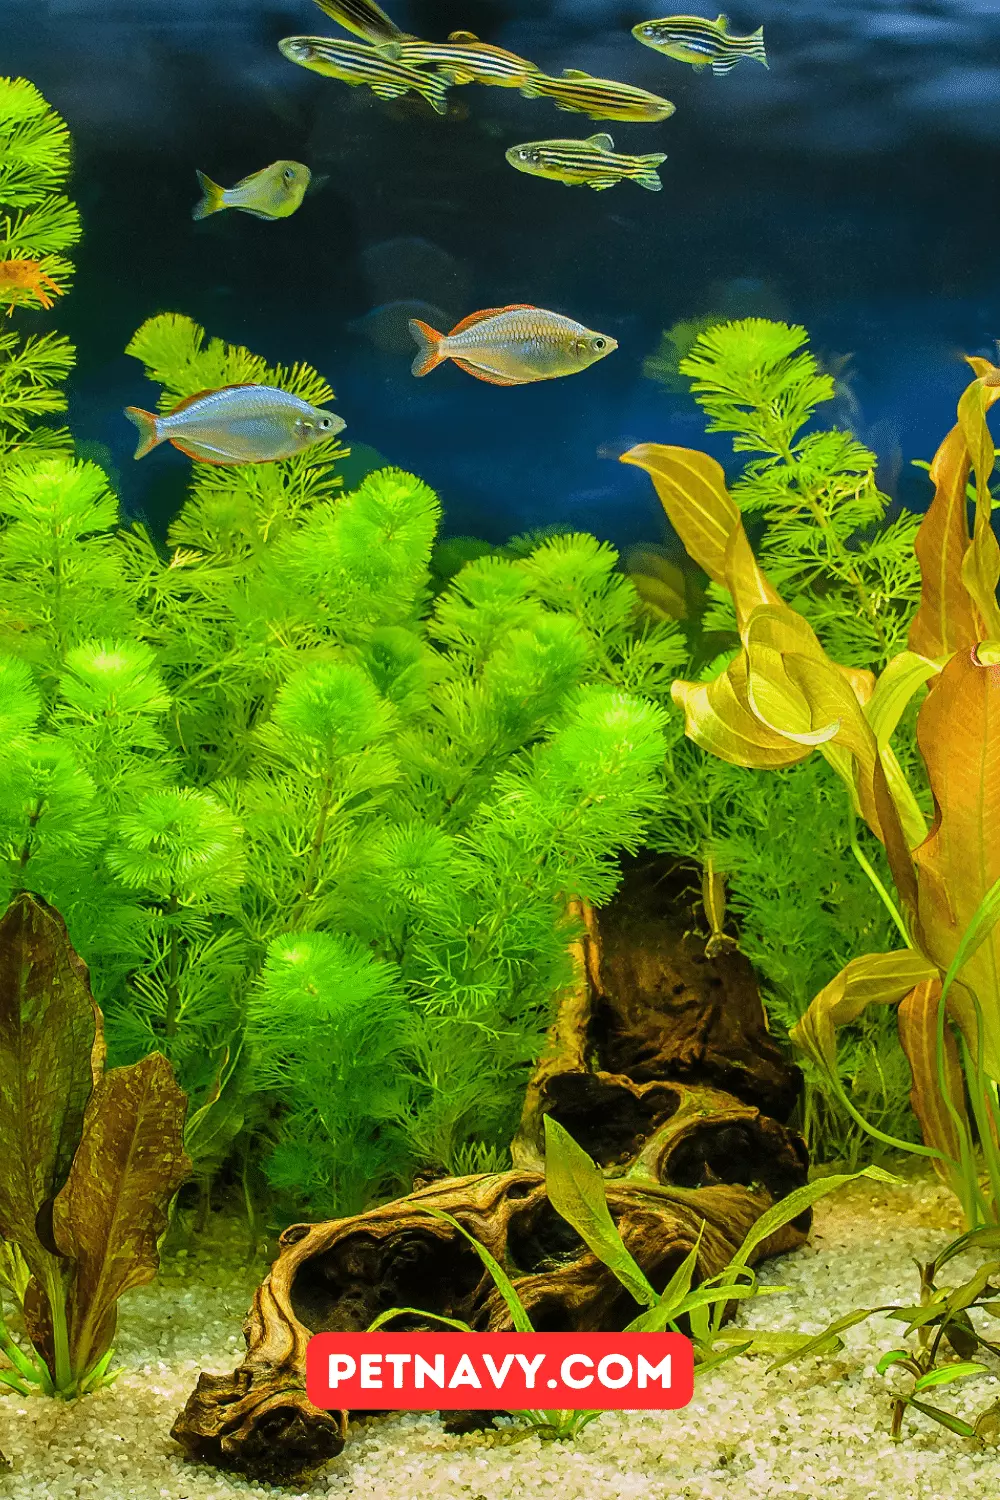 5 Tips on How to Choose the Best Aquarium Heater?